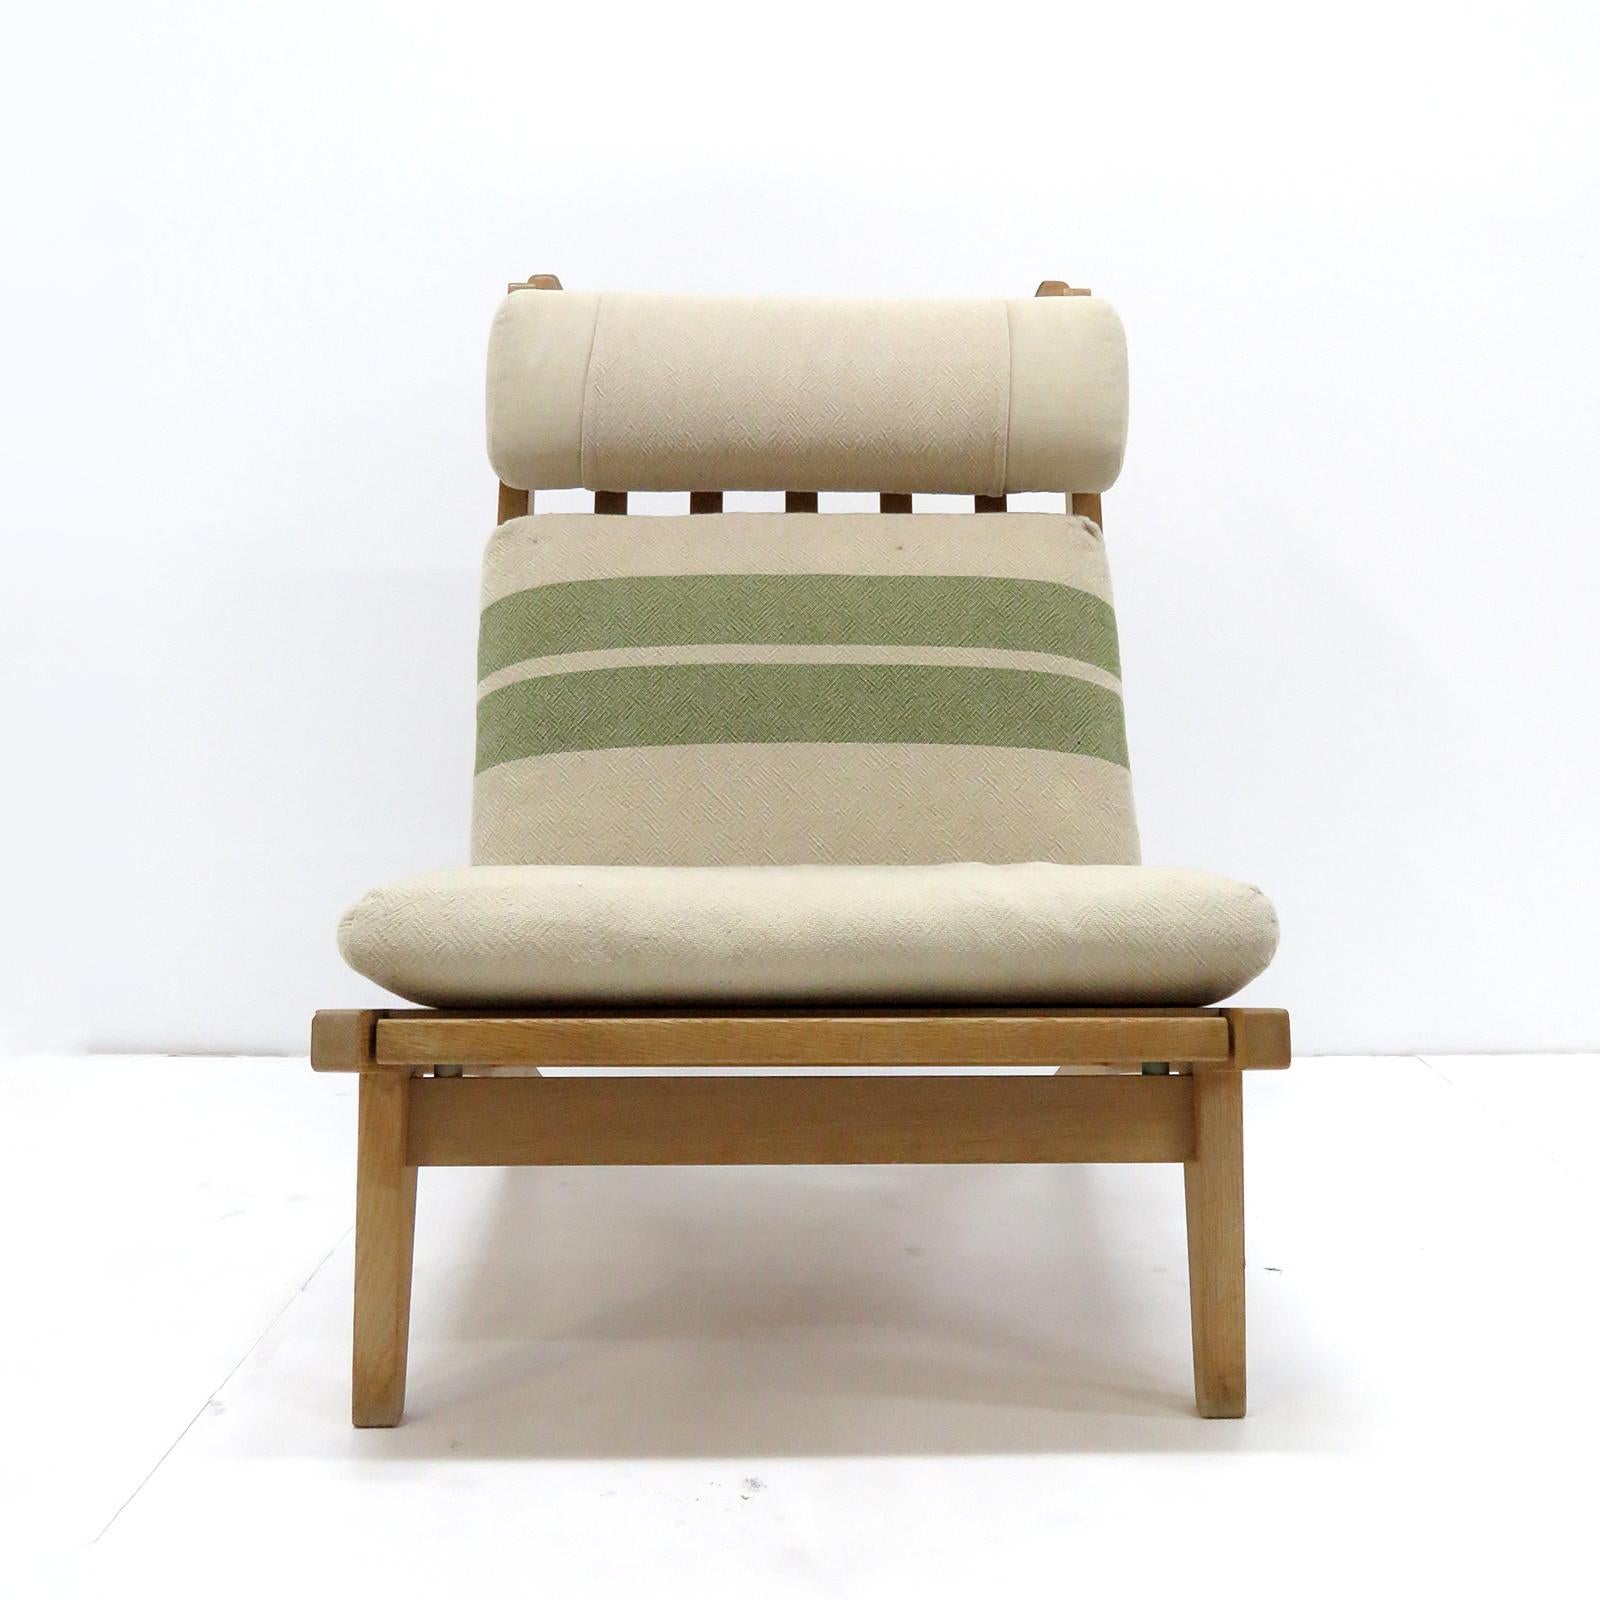 Large scale high back chair by Hans Wegner with solid oak frame and original cushions in beige/greenish striped wool, produced by GETAMA in 1969, model GE 375, detachable neck cushion, original makers mark to underside.